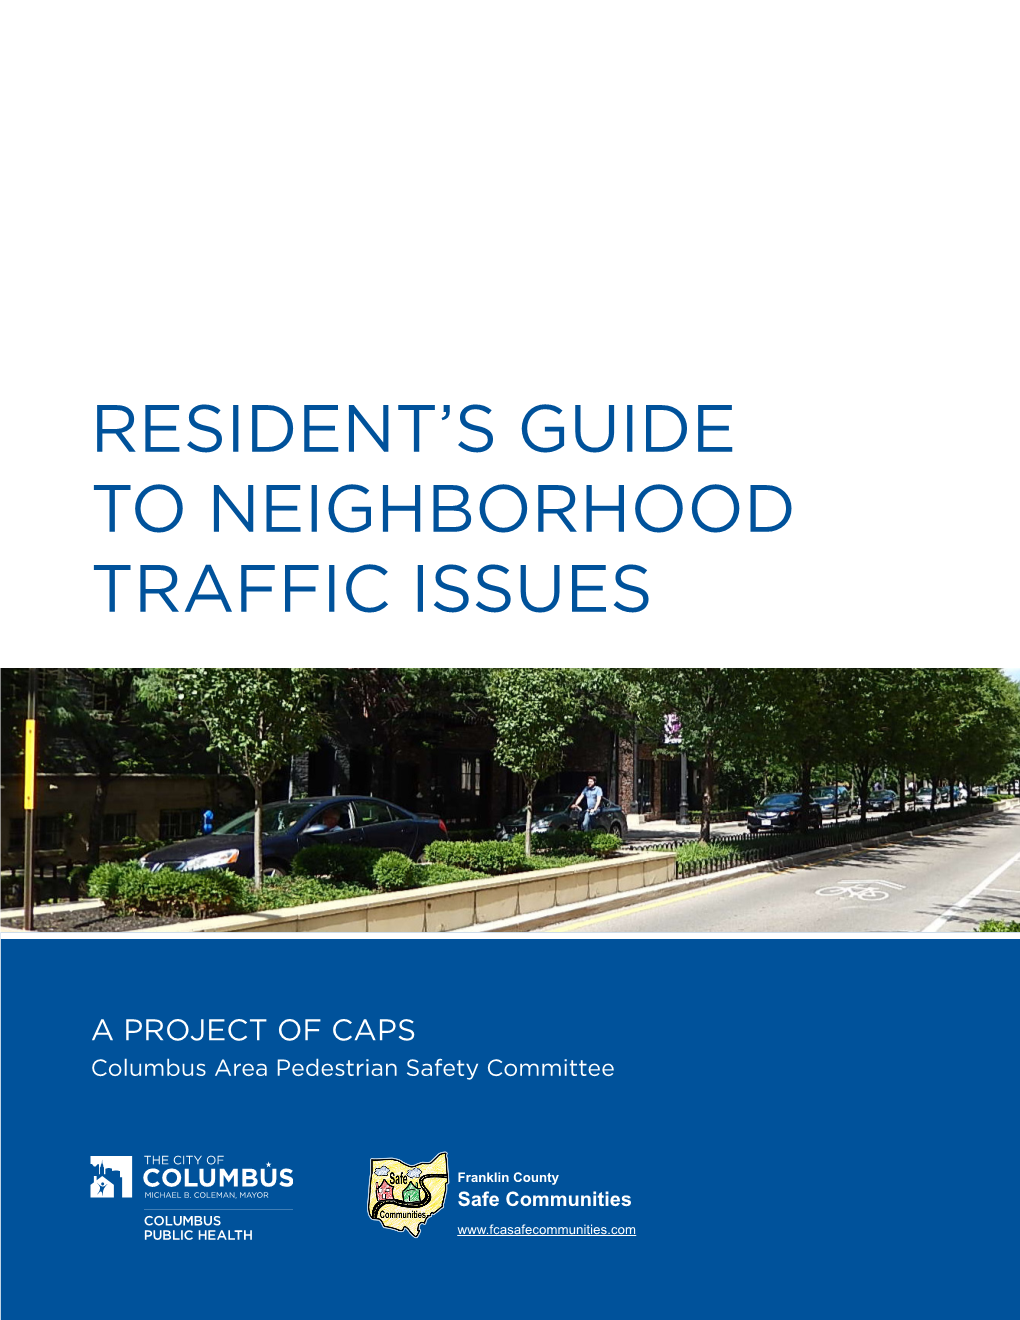 Caps Residents Guide to Neighborhood Traffic Issues